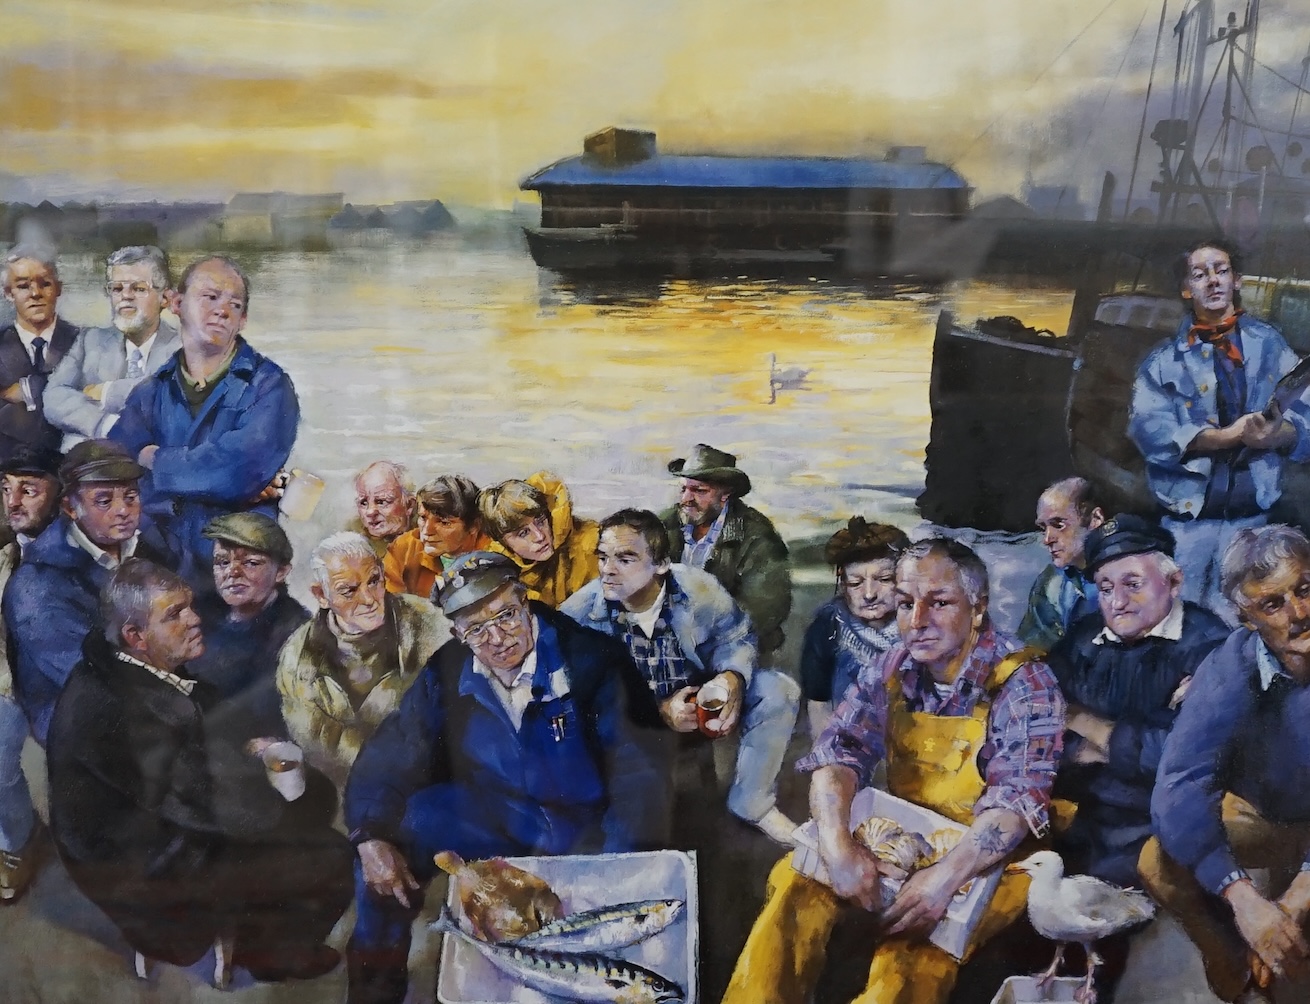 Robert Lenkiewicz (1941-2002), stochastic screened lithograph, 'The Barbican Fishermen 2000', signed in pencil, 15/250, 47 x 60cm. Condition - good